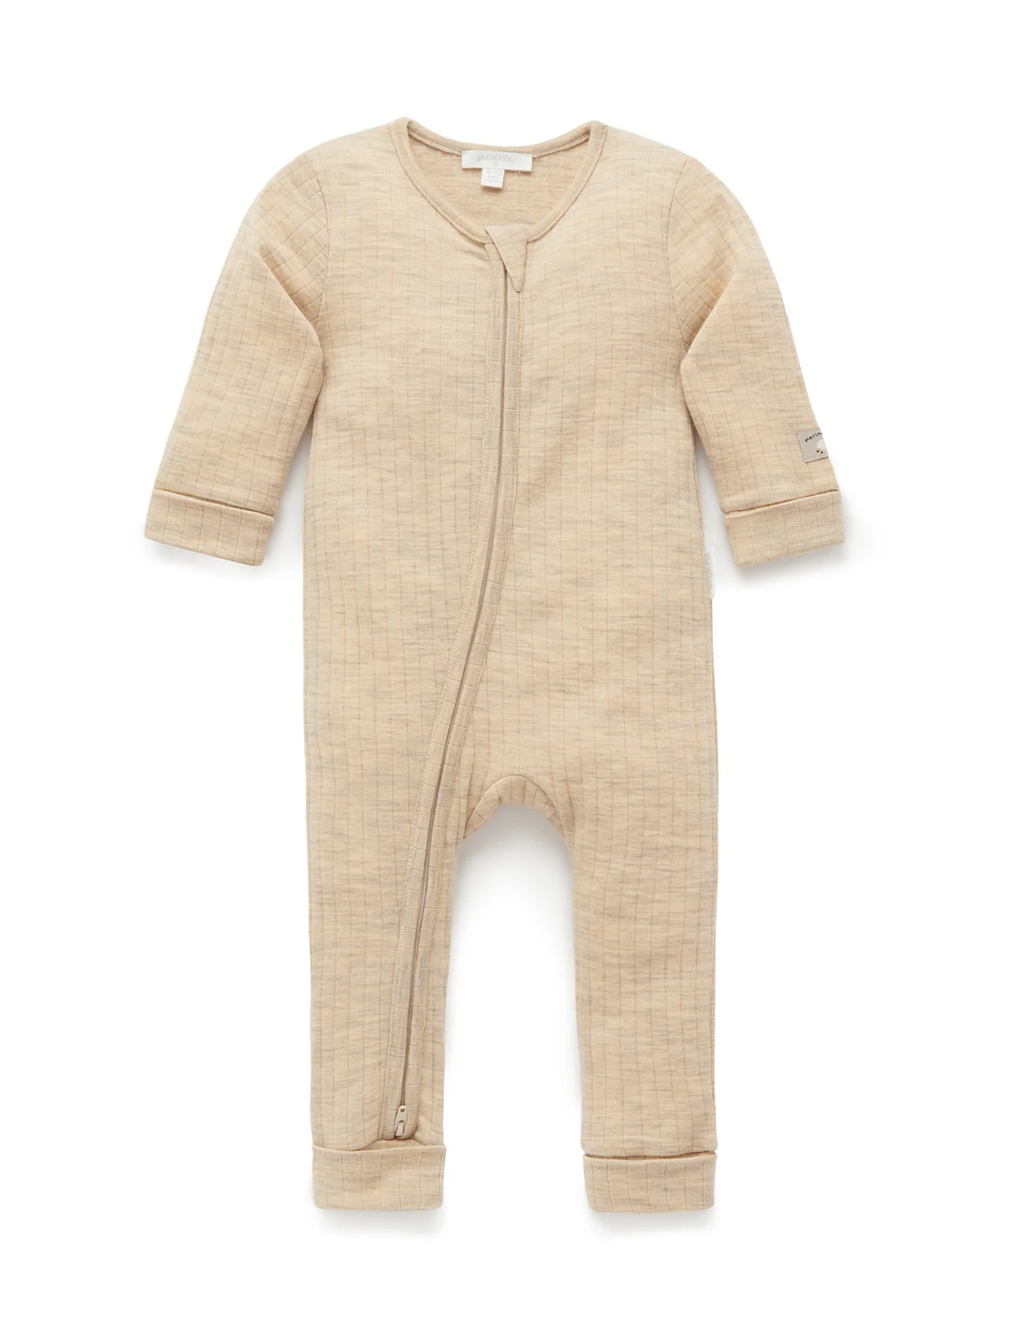 Merino Growsuit offers at $69.95 in Purebaby